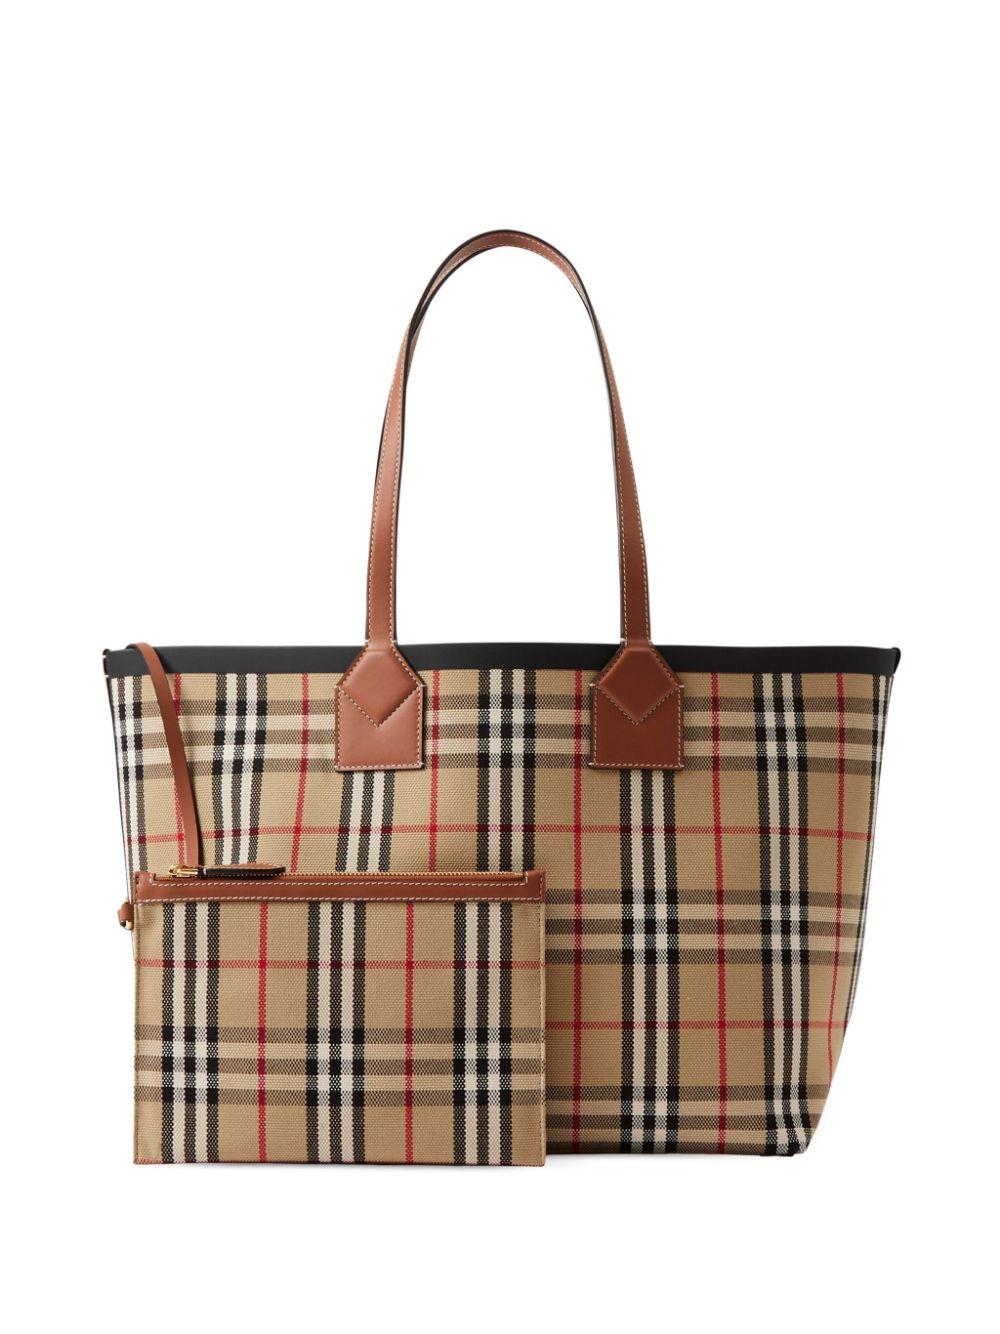 biologisch Opschudding Stal Burberry Medium London Check-pattern Tote Bag in White | Lyst